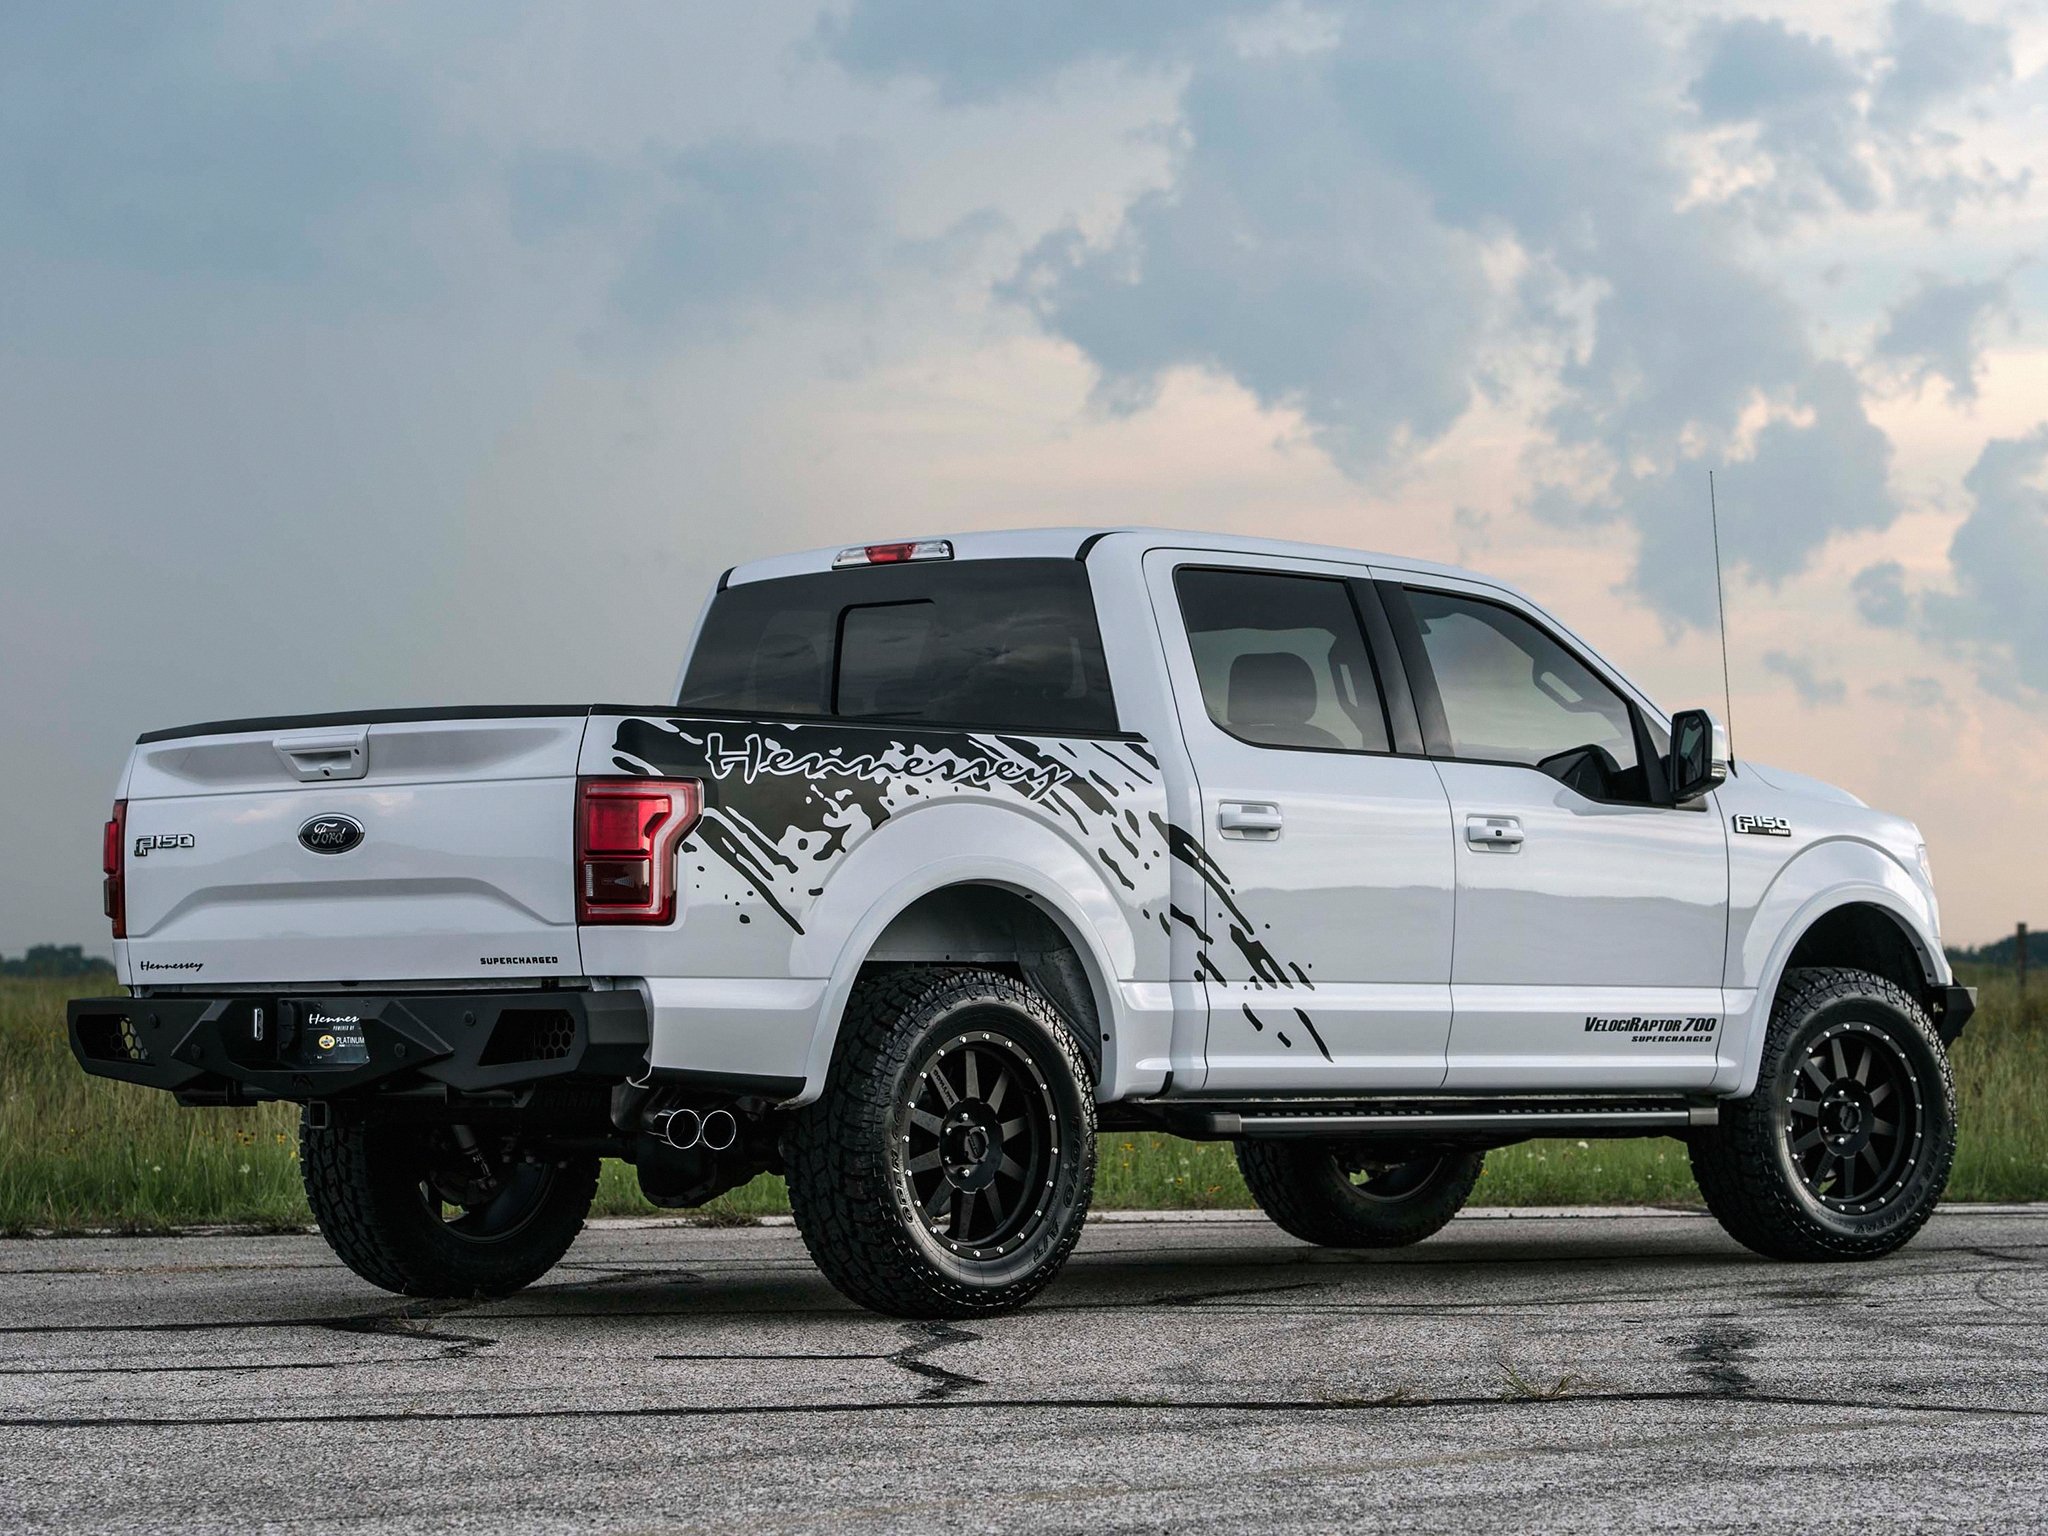 2016, Hennessey, Velociraptor, 700, Supercharged, 25th, Anniversary, Pickup Wallpaper